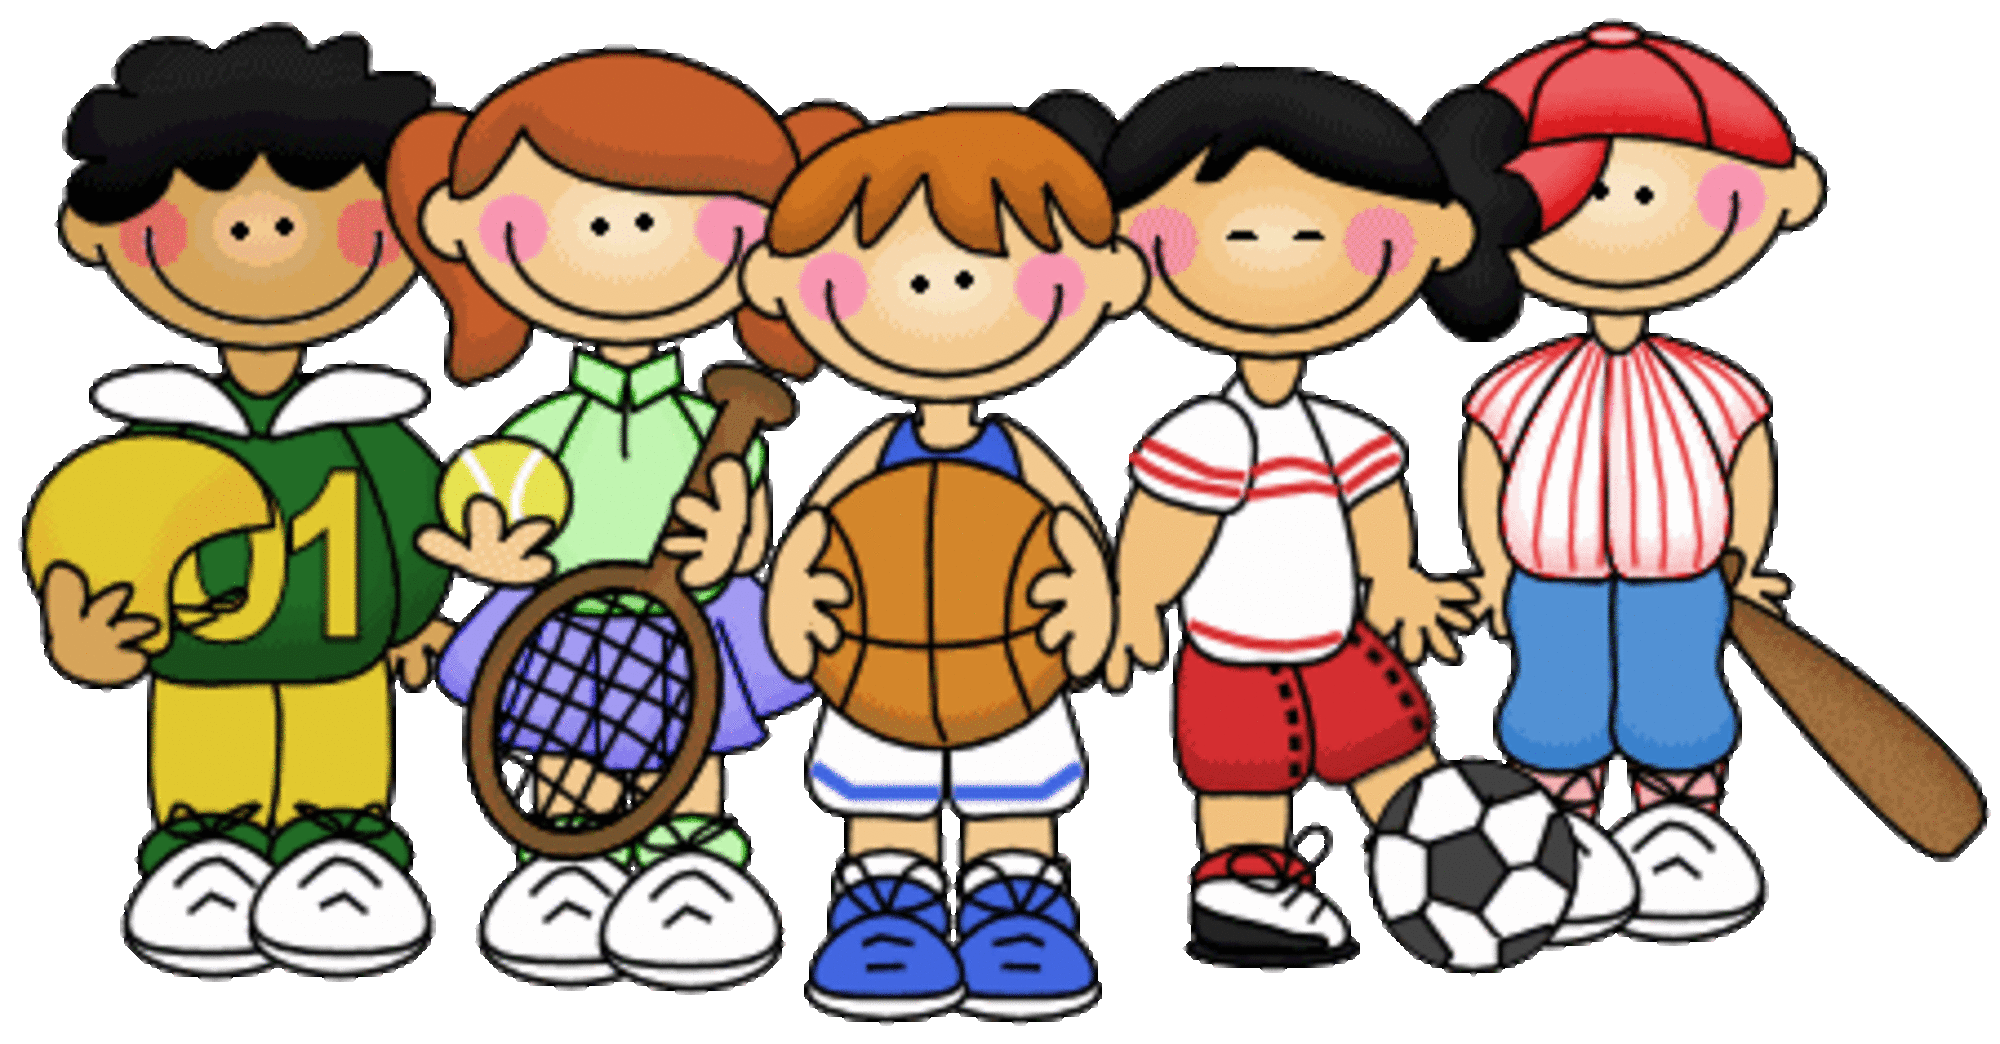 Education more than just. Pe clipart physical need